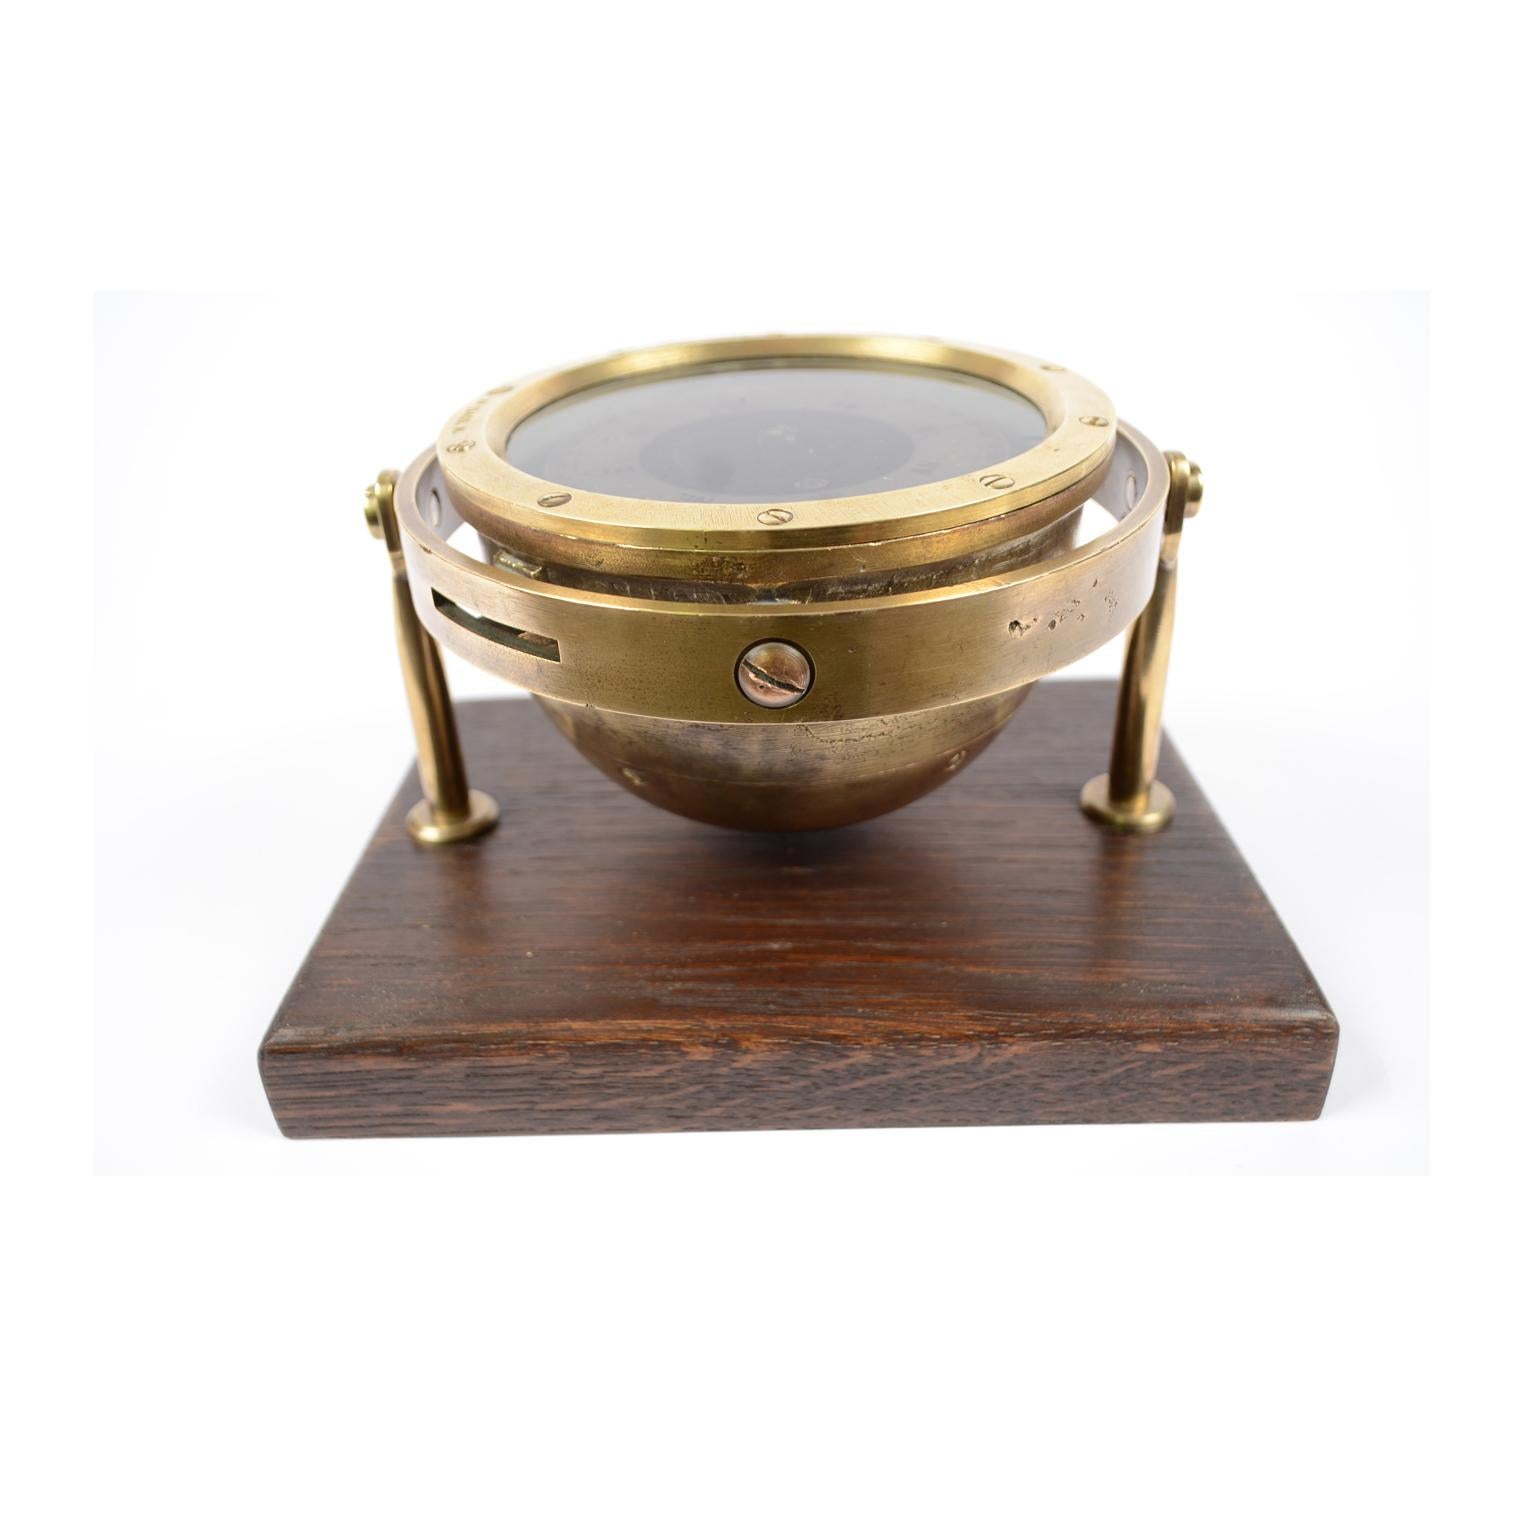 Brass and bronze liquid compass, mounted on a universal joint, British manufacture of the 1940s, signed Patt 0183 and placed on a wooden board. Compass diameter cm 15.4, base cm 23.7x17, height cm 16.
Shipping insured by Lloyd's London; it is